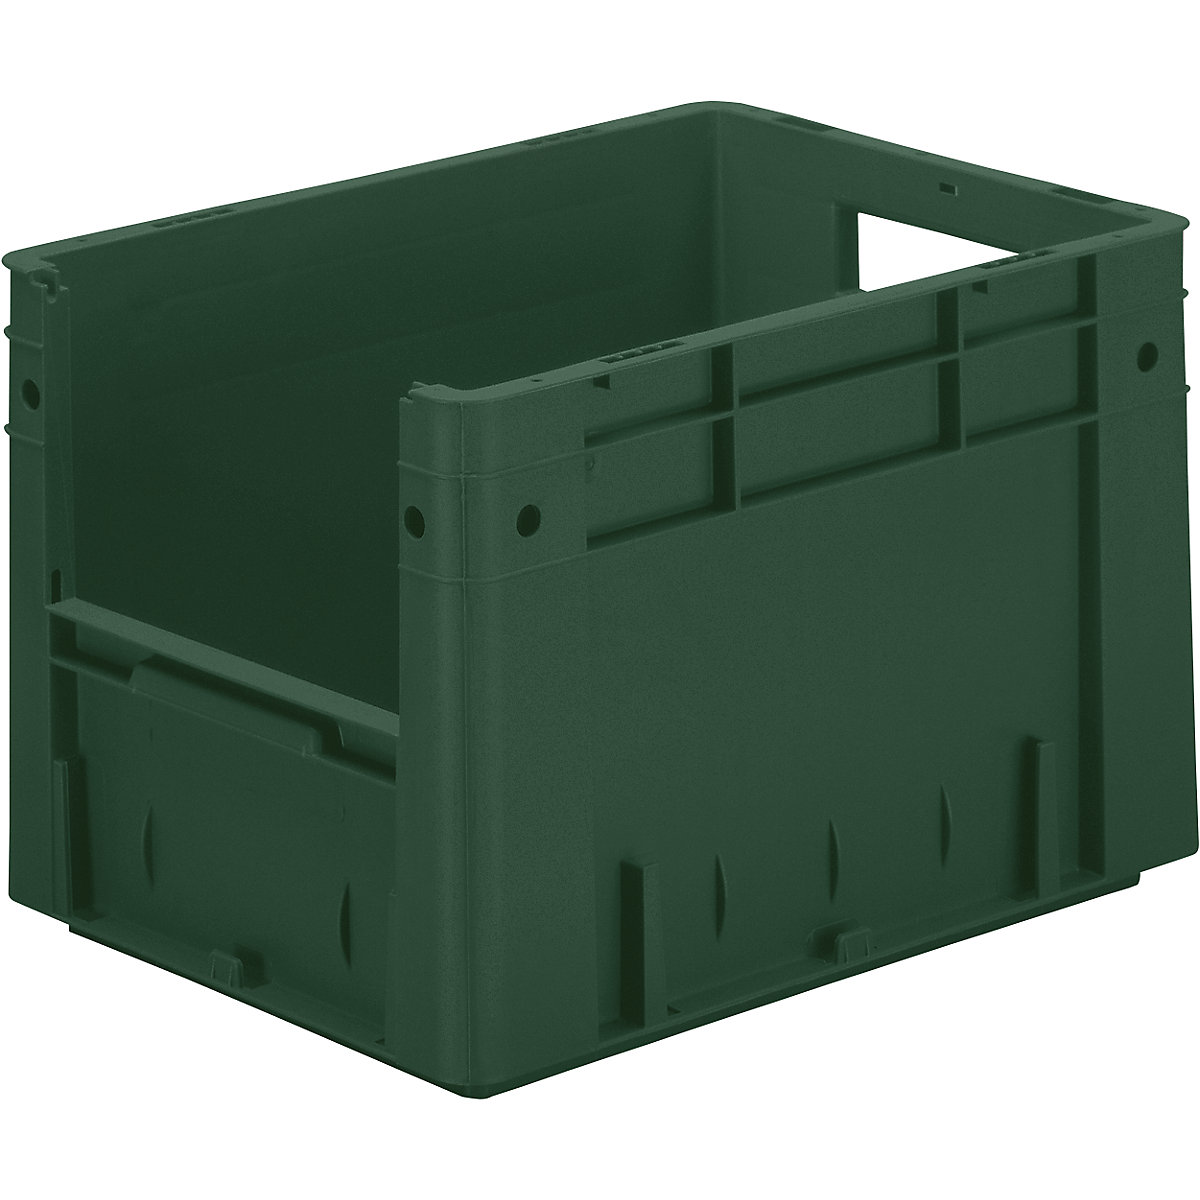 Euro stacking container, capacity 23.3 l, LxWxH 400 x 300 x 270 mm, pack of 4, green-4